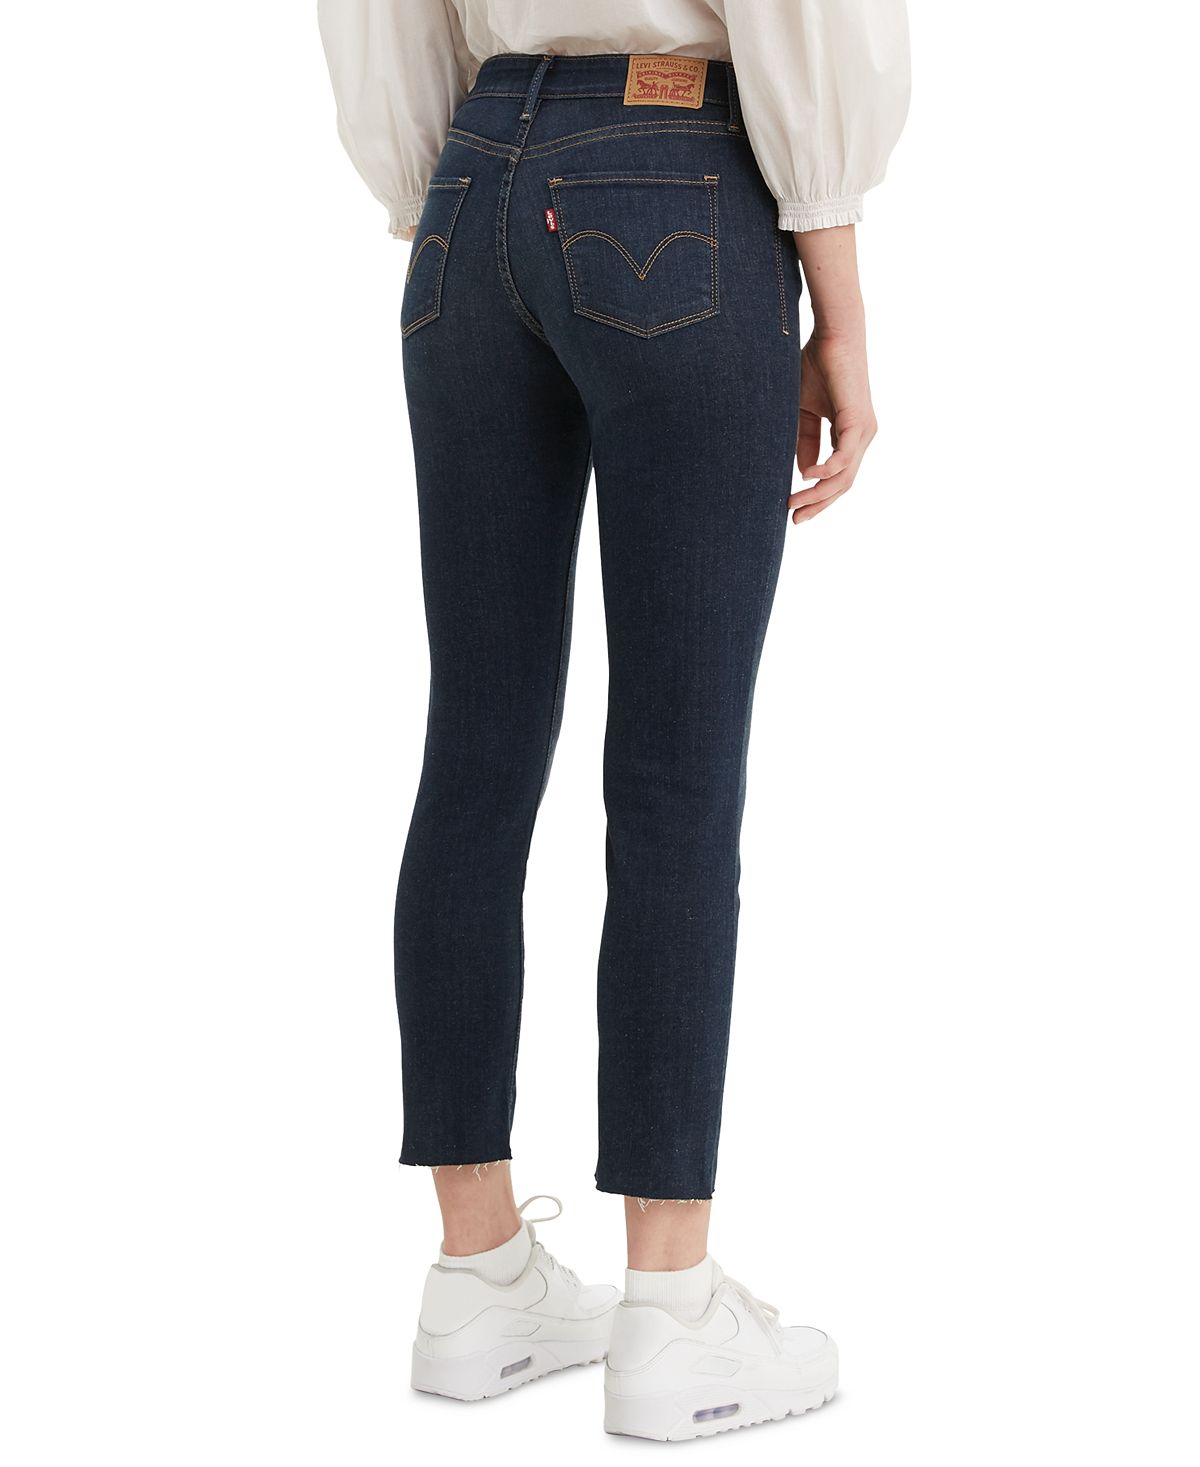 Levi's wo Classic Skinny Ankle Jeans Night Cap